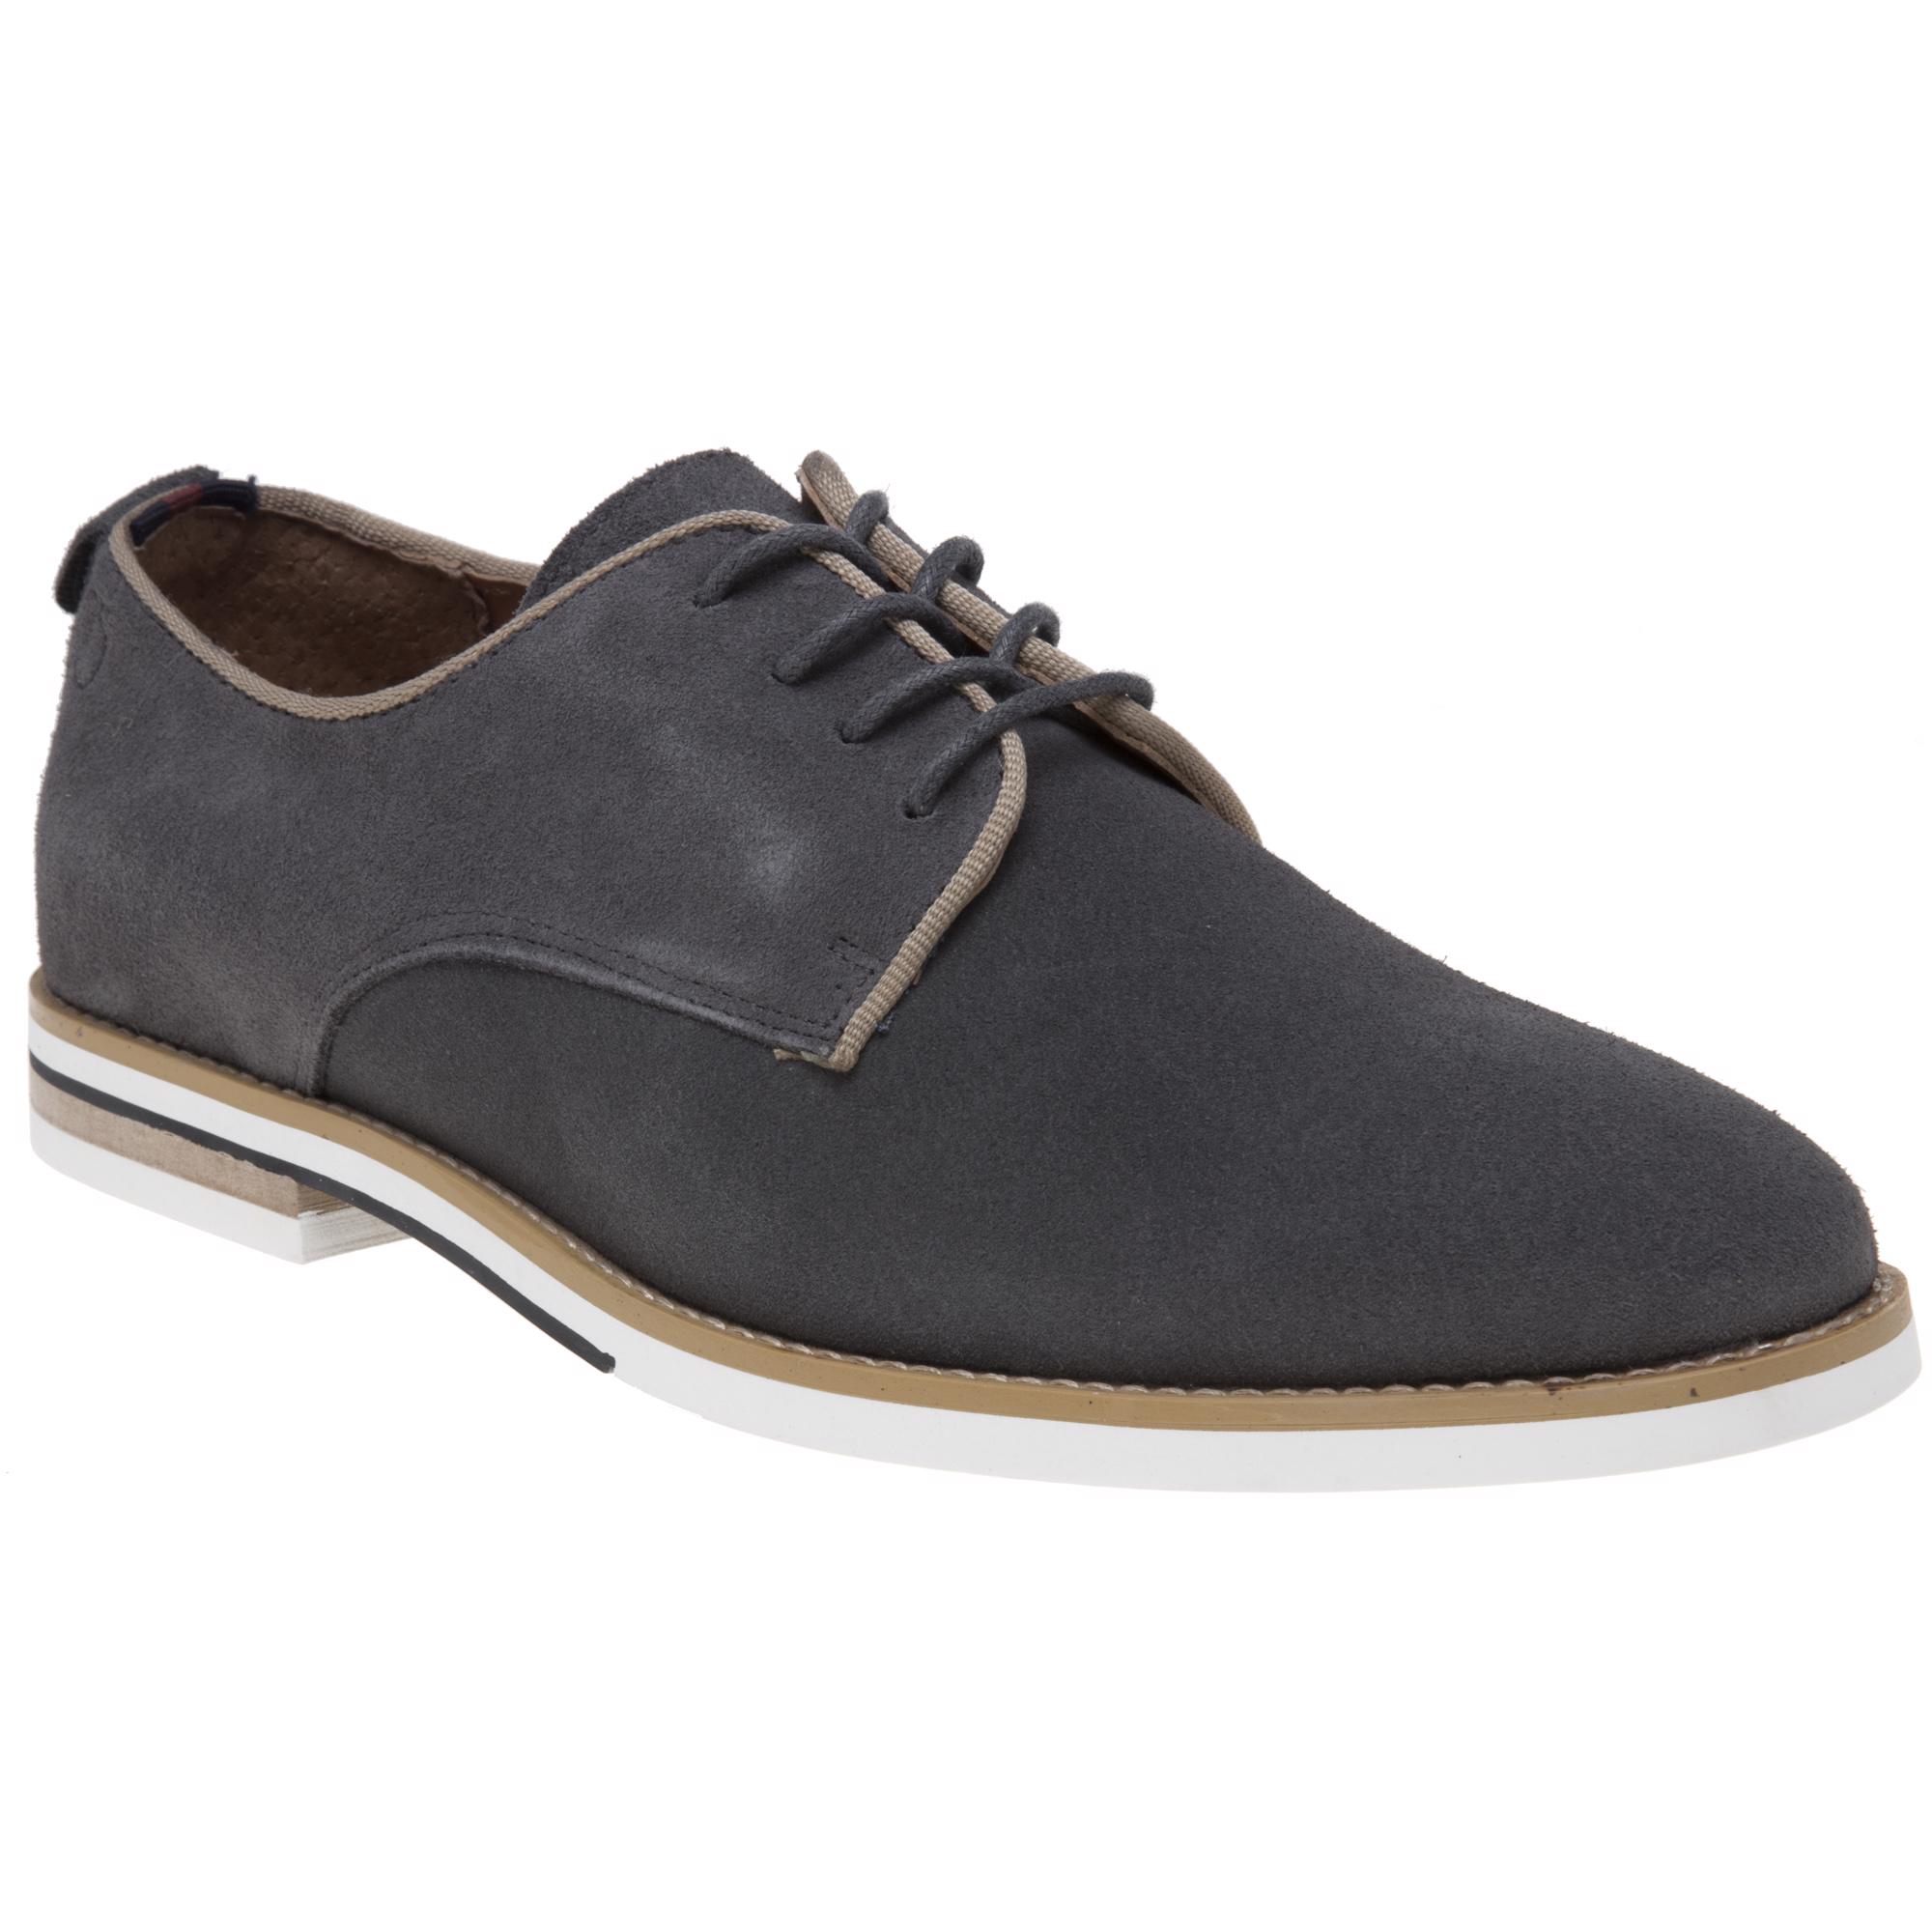 New Mens Peter Werth Grey Nesbitt Suede Shoes Lace Up 